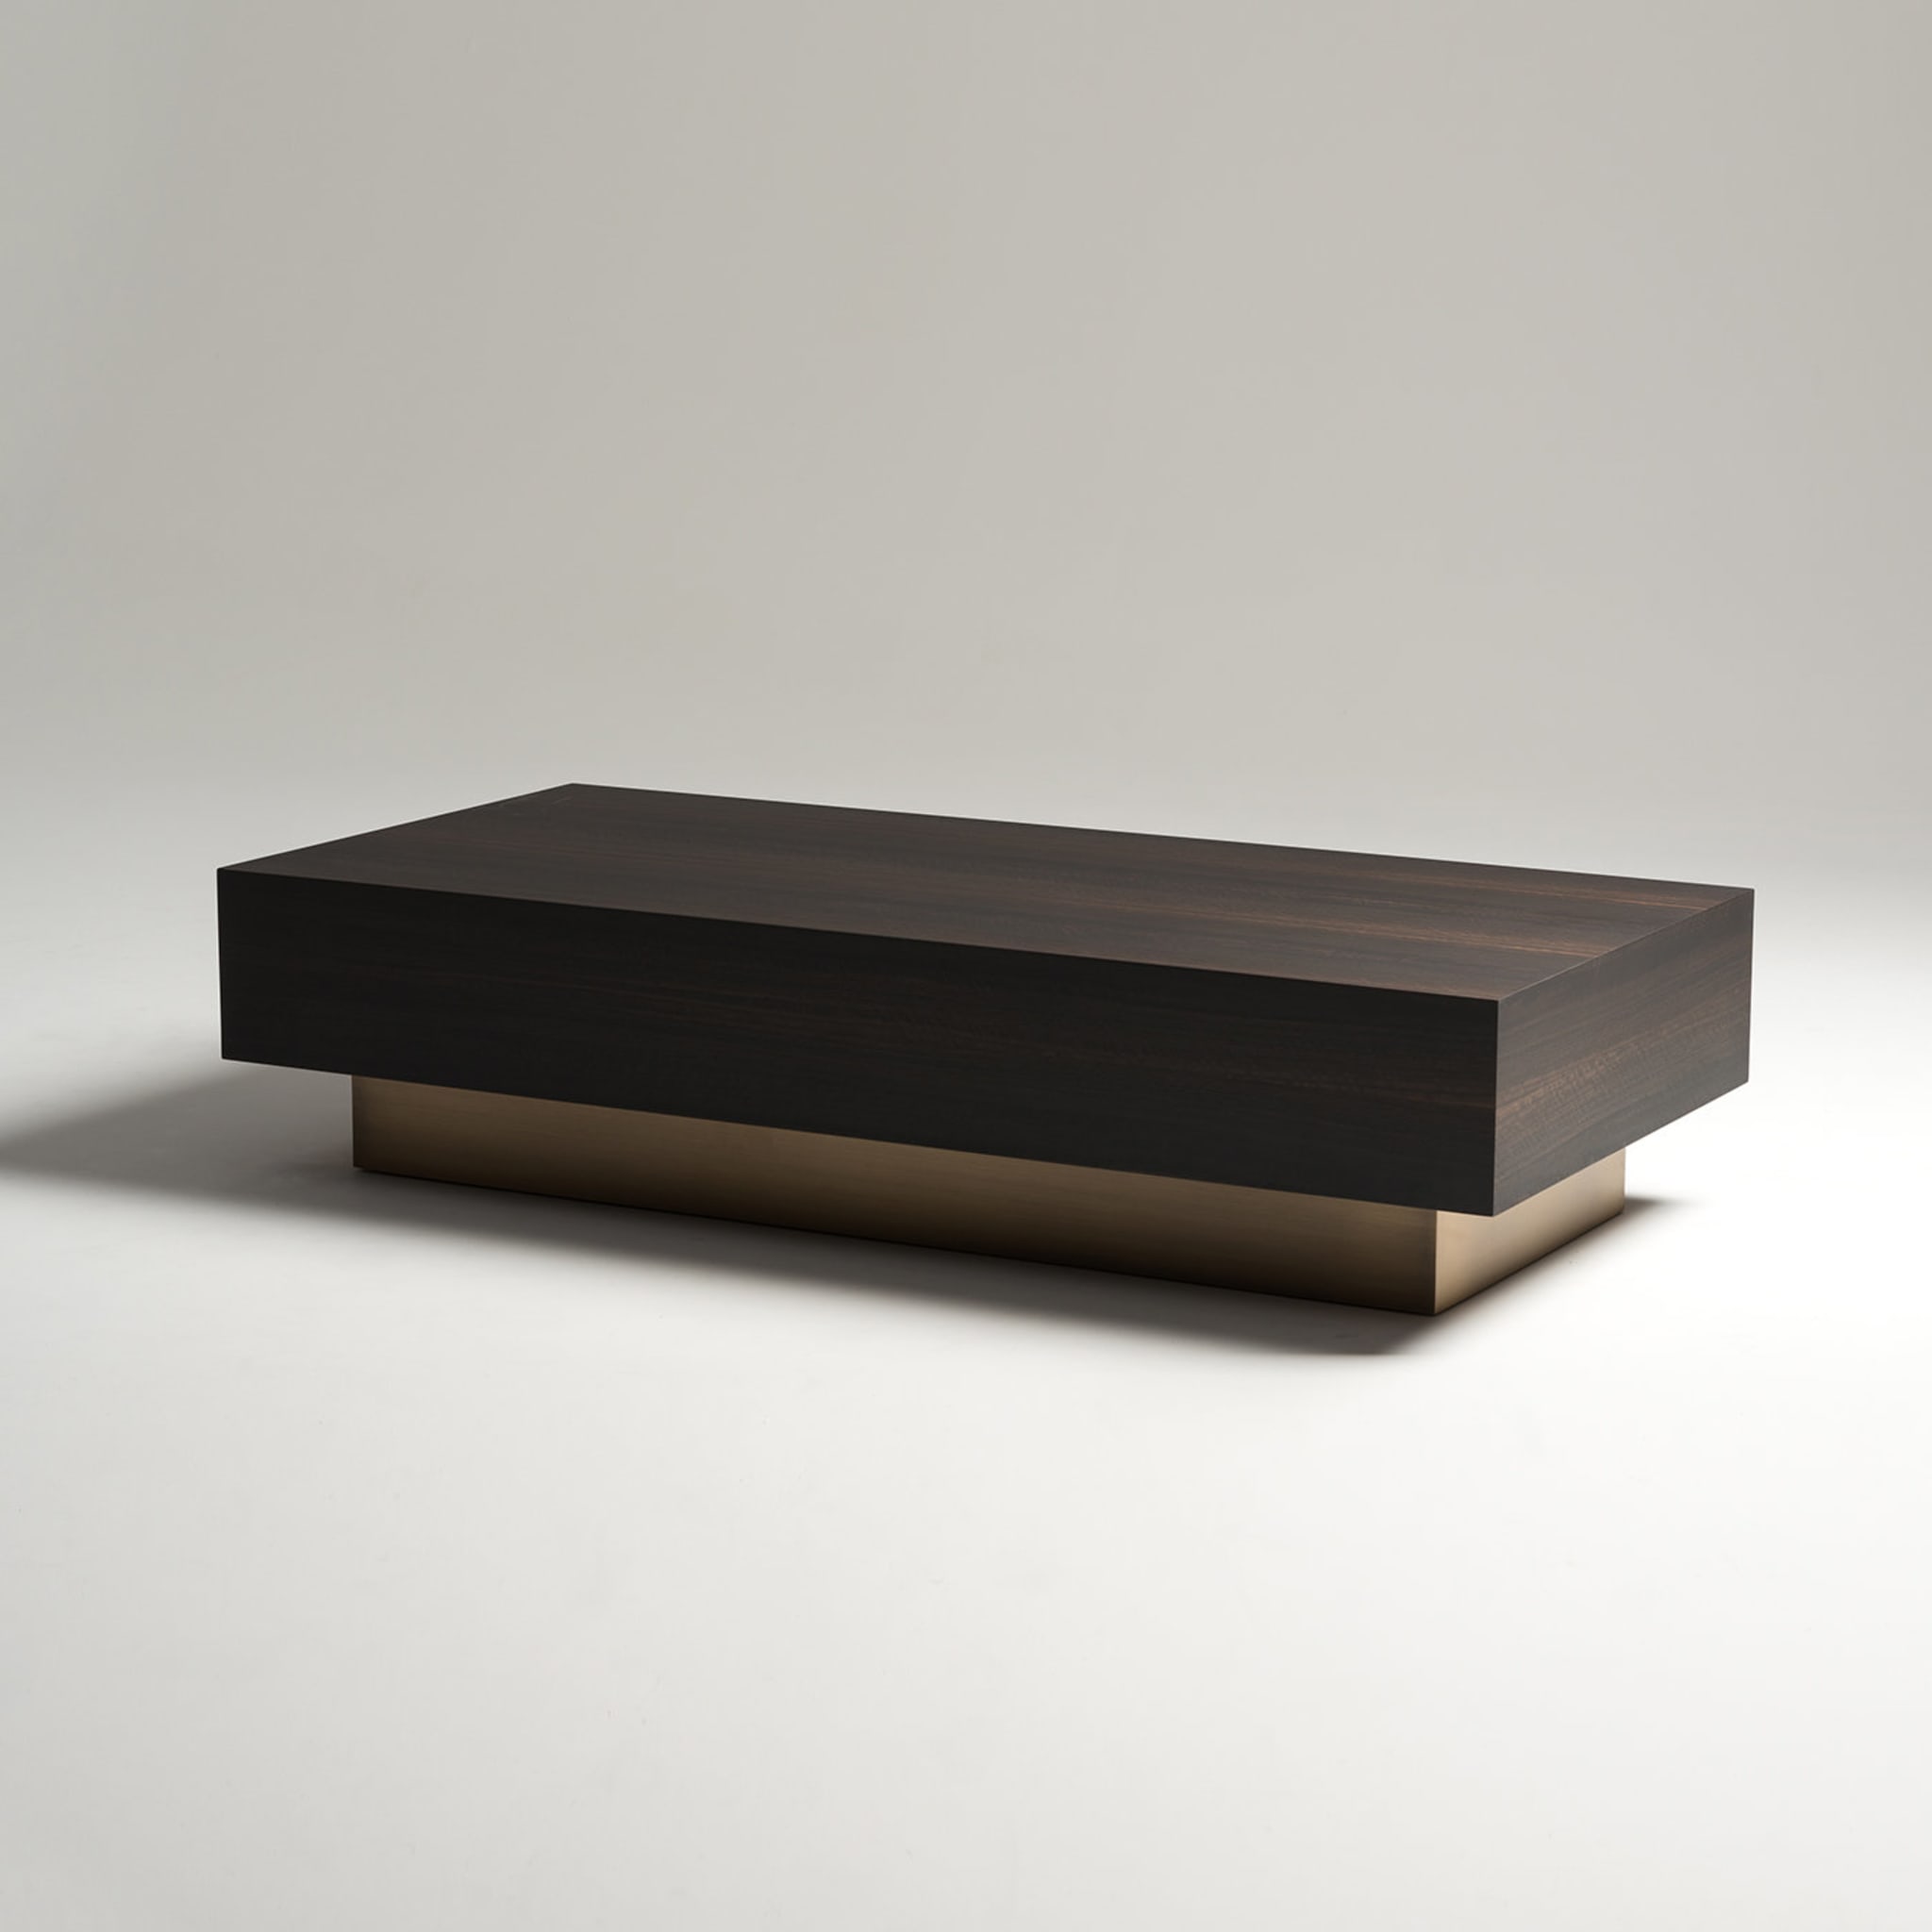 Cubo coffee table by Marco and Giulio Mantellassi - Alternative view 1